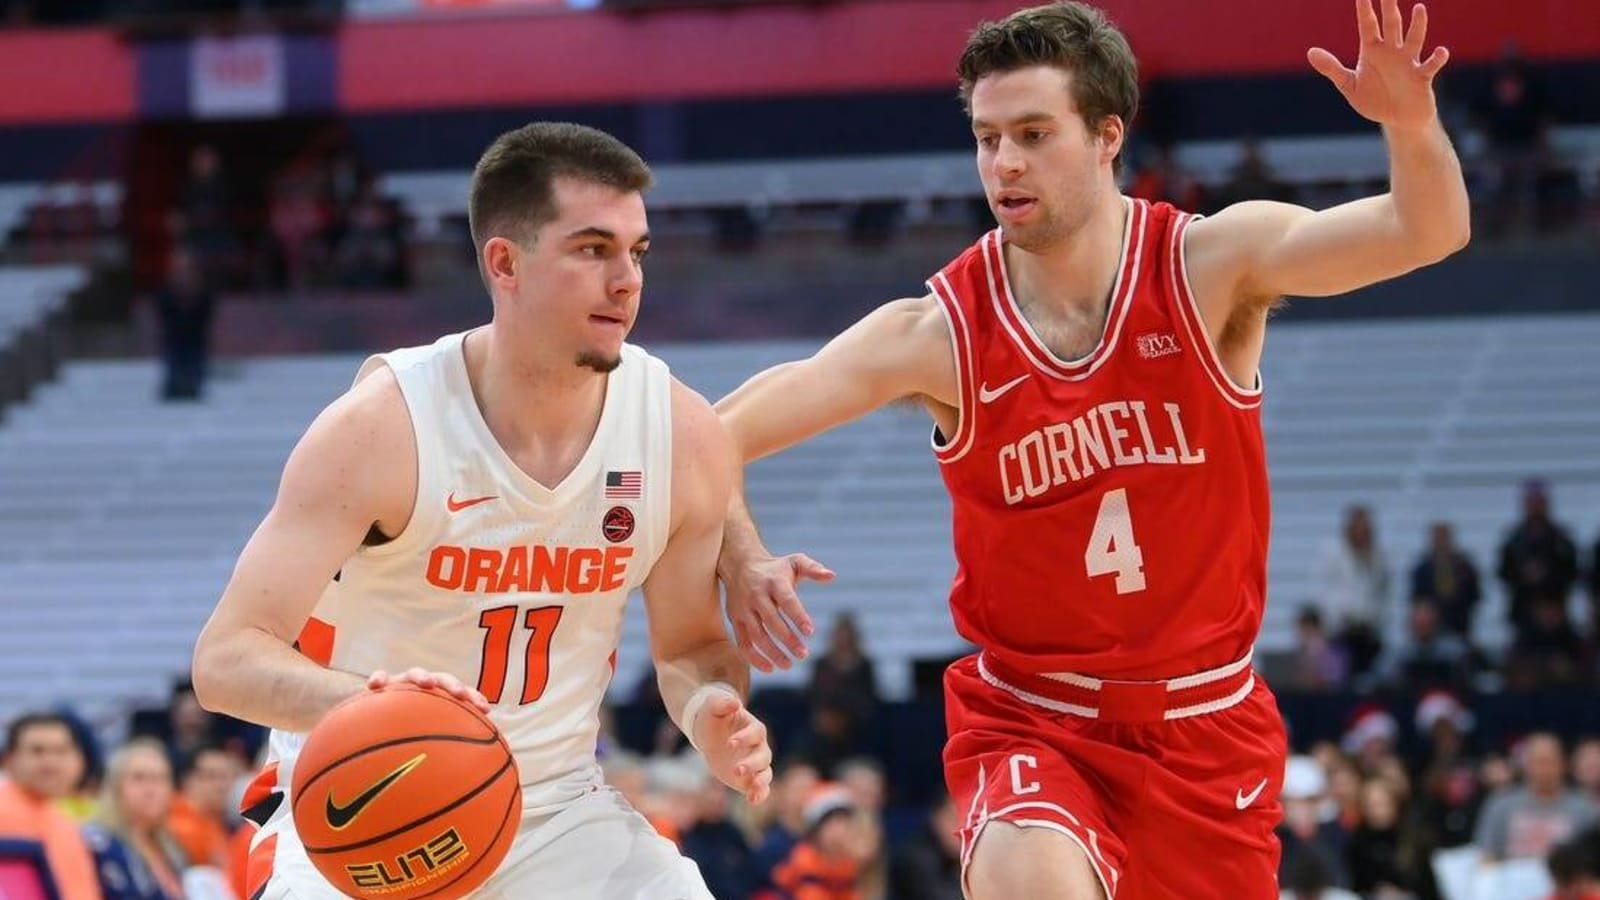 Syracuse rolls, extends win streak against Cornell to 42